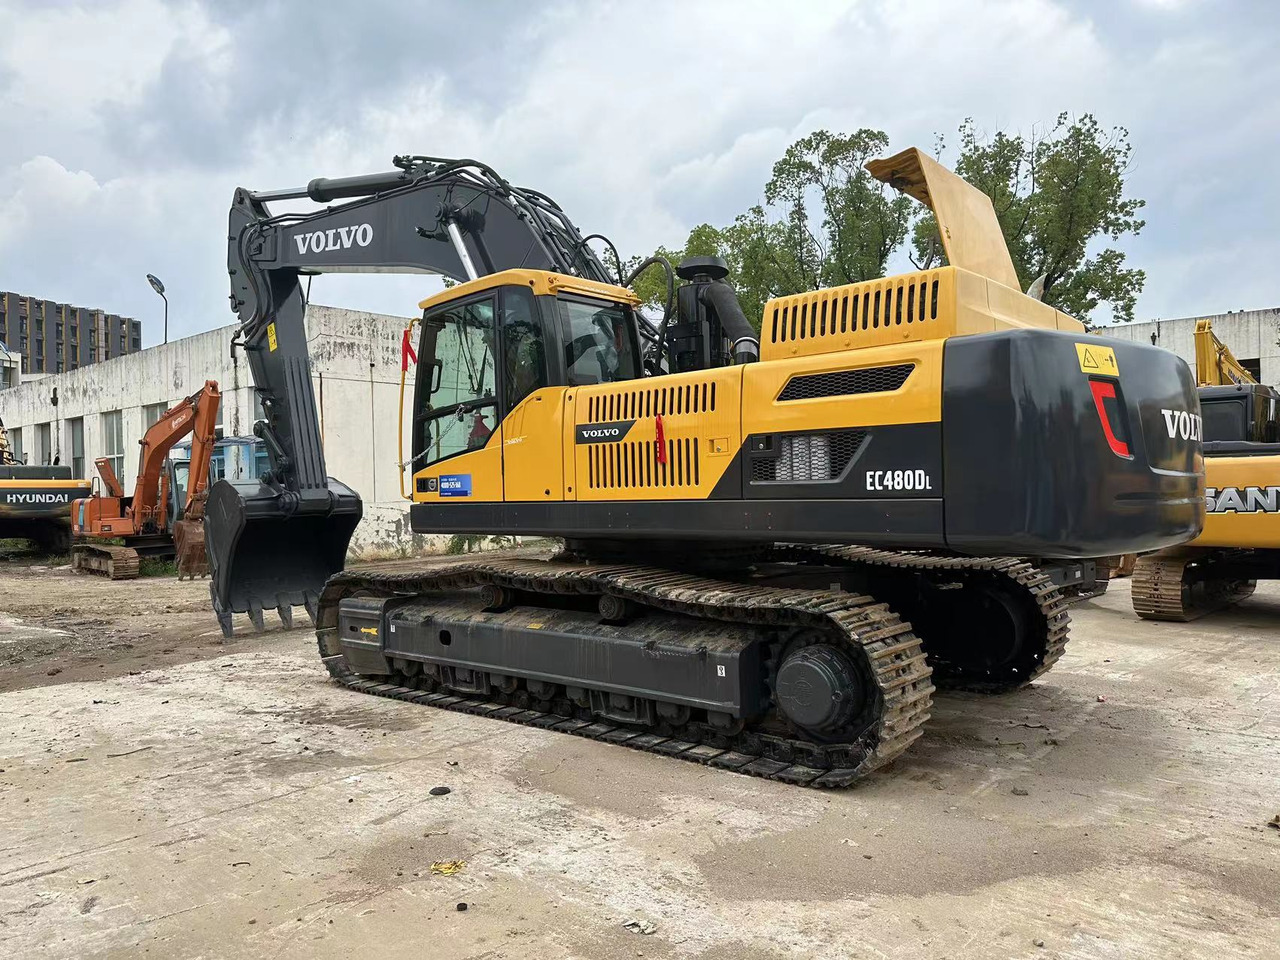 Hot selling original made Used excavator VOLVO EC480DL in stock low price for sale lizing Hot selling original made Used excavator VOLVO EC480DL in stock low price for sale: slika 11